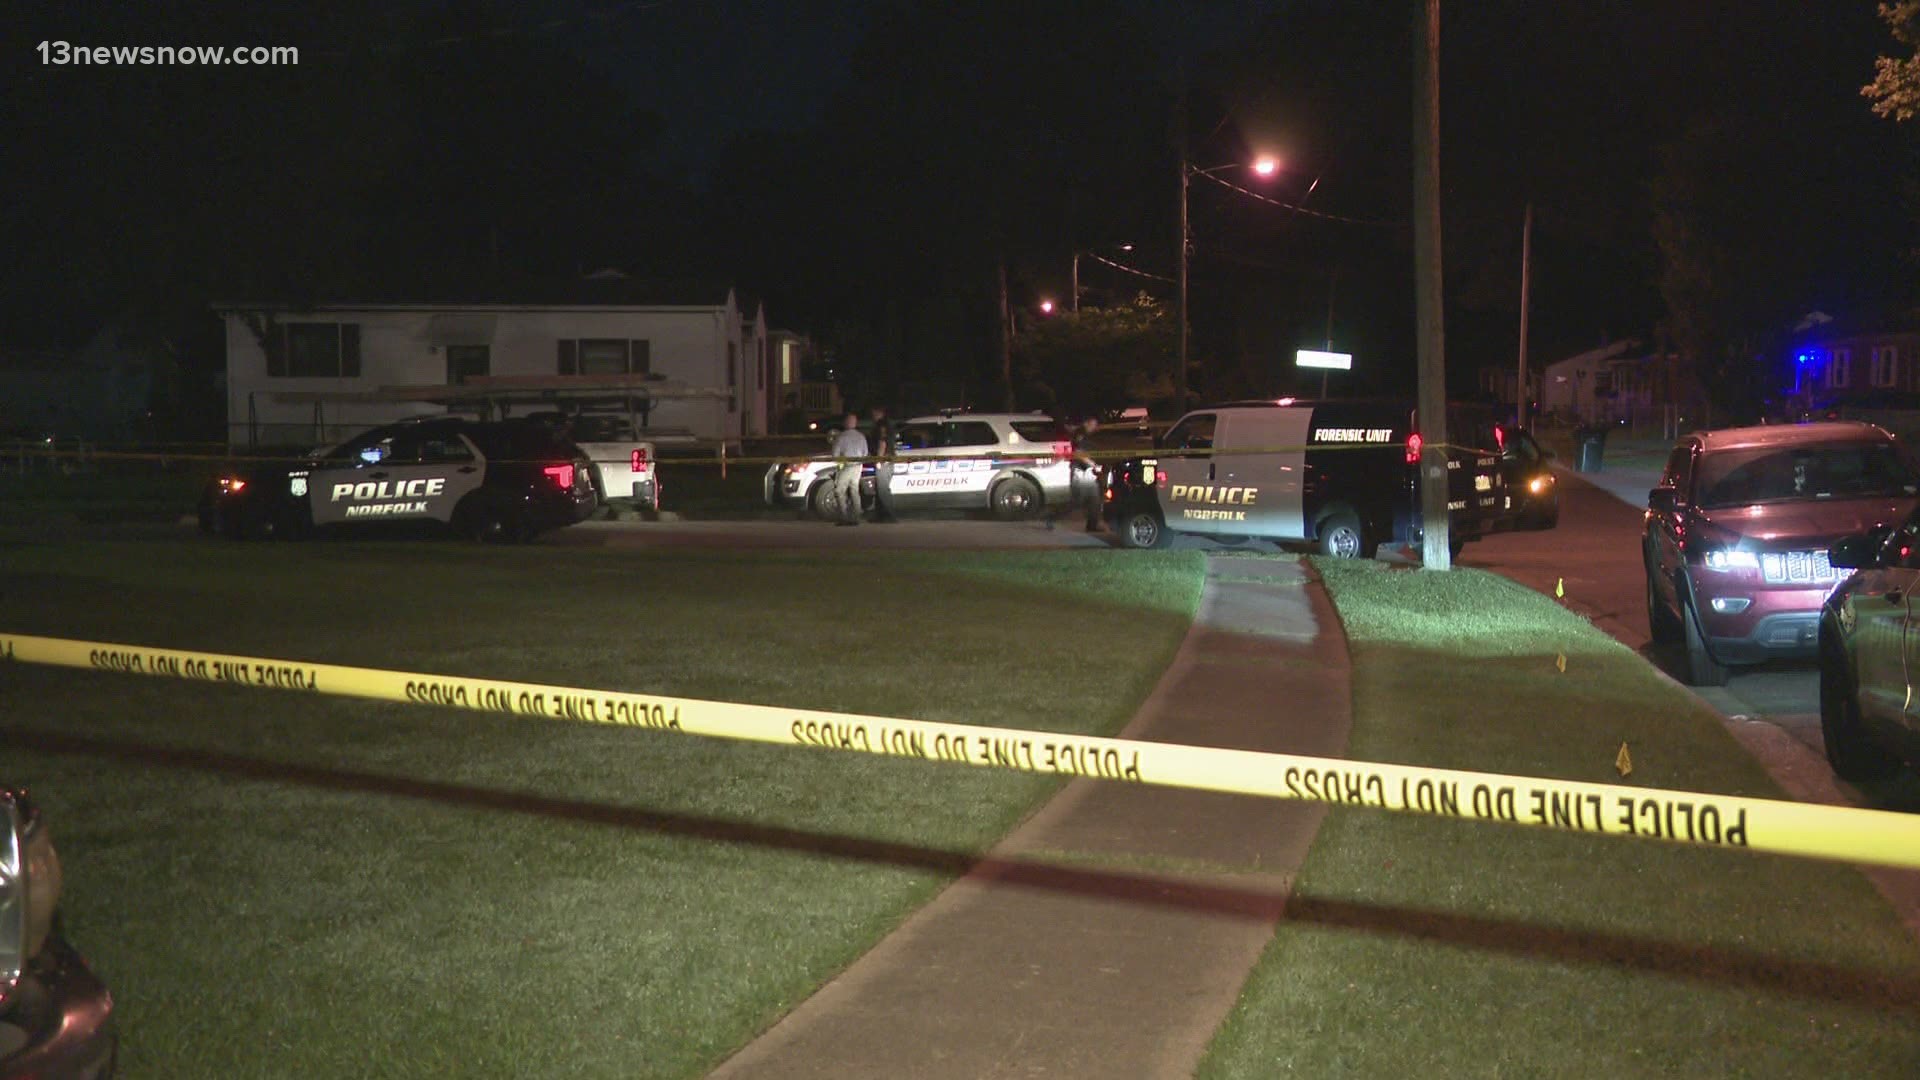 Police say a man was killed in the first shooting, while two people were hurt in the second shooting. One of those victims has life-threatening injuries.